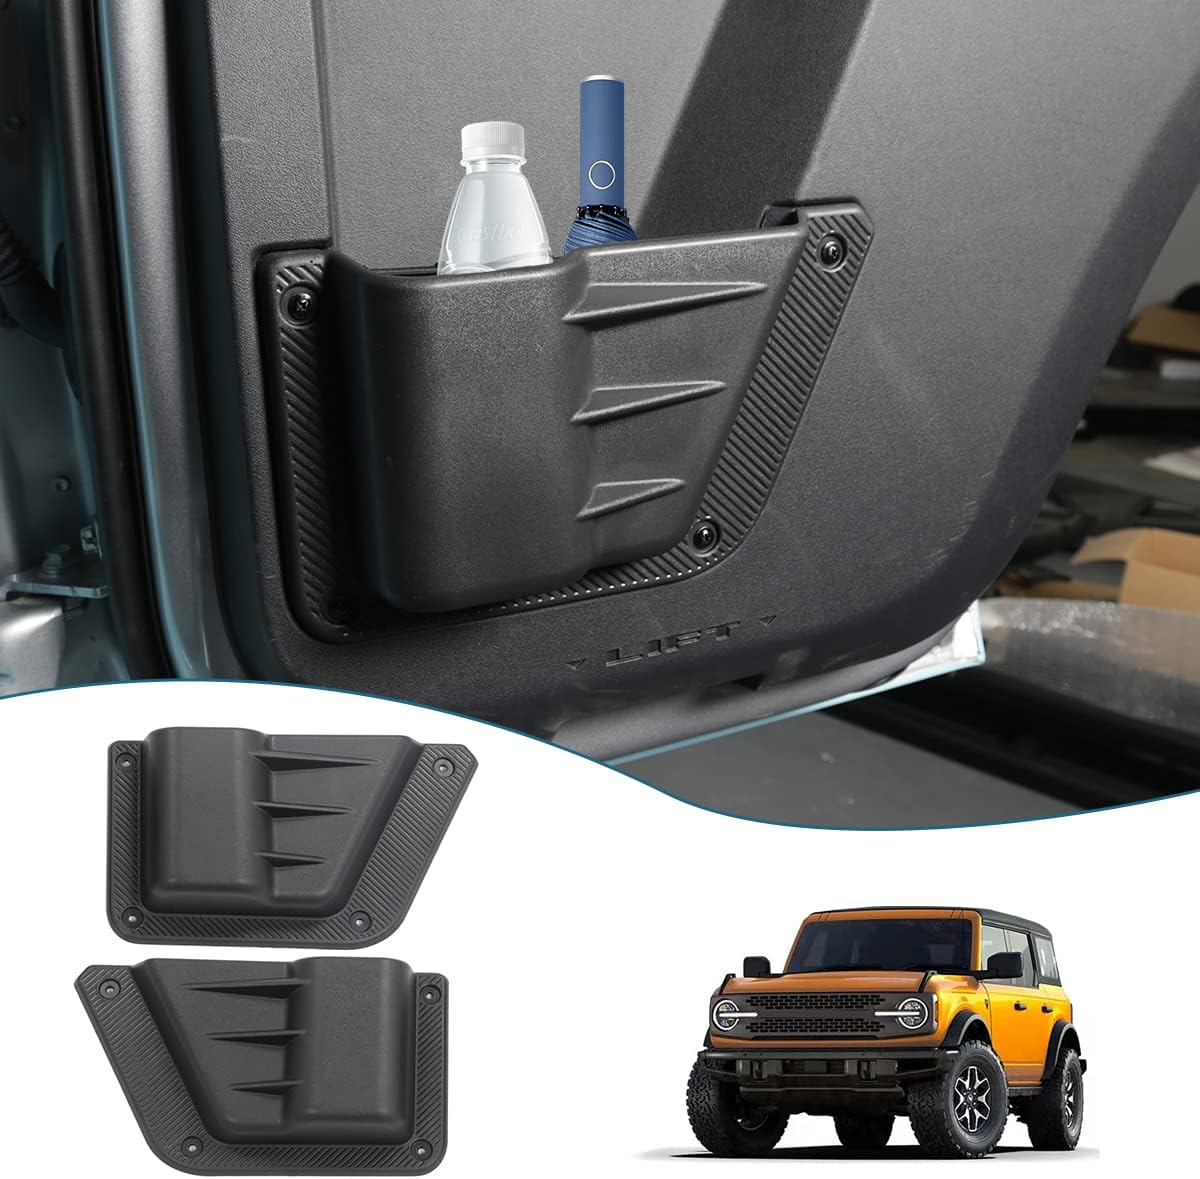 Ford Bronco LOW PRICE ALERT - SHIPS SAME DAY - Door Insert Storage Cupholder Boxes For 2021-2023 Ford Bronco 2/4 Door door-insert-storage-boxes-for-2021-2023-ford-bronco-2-4-door-2